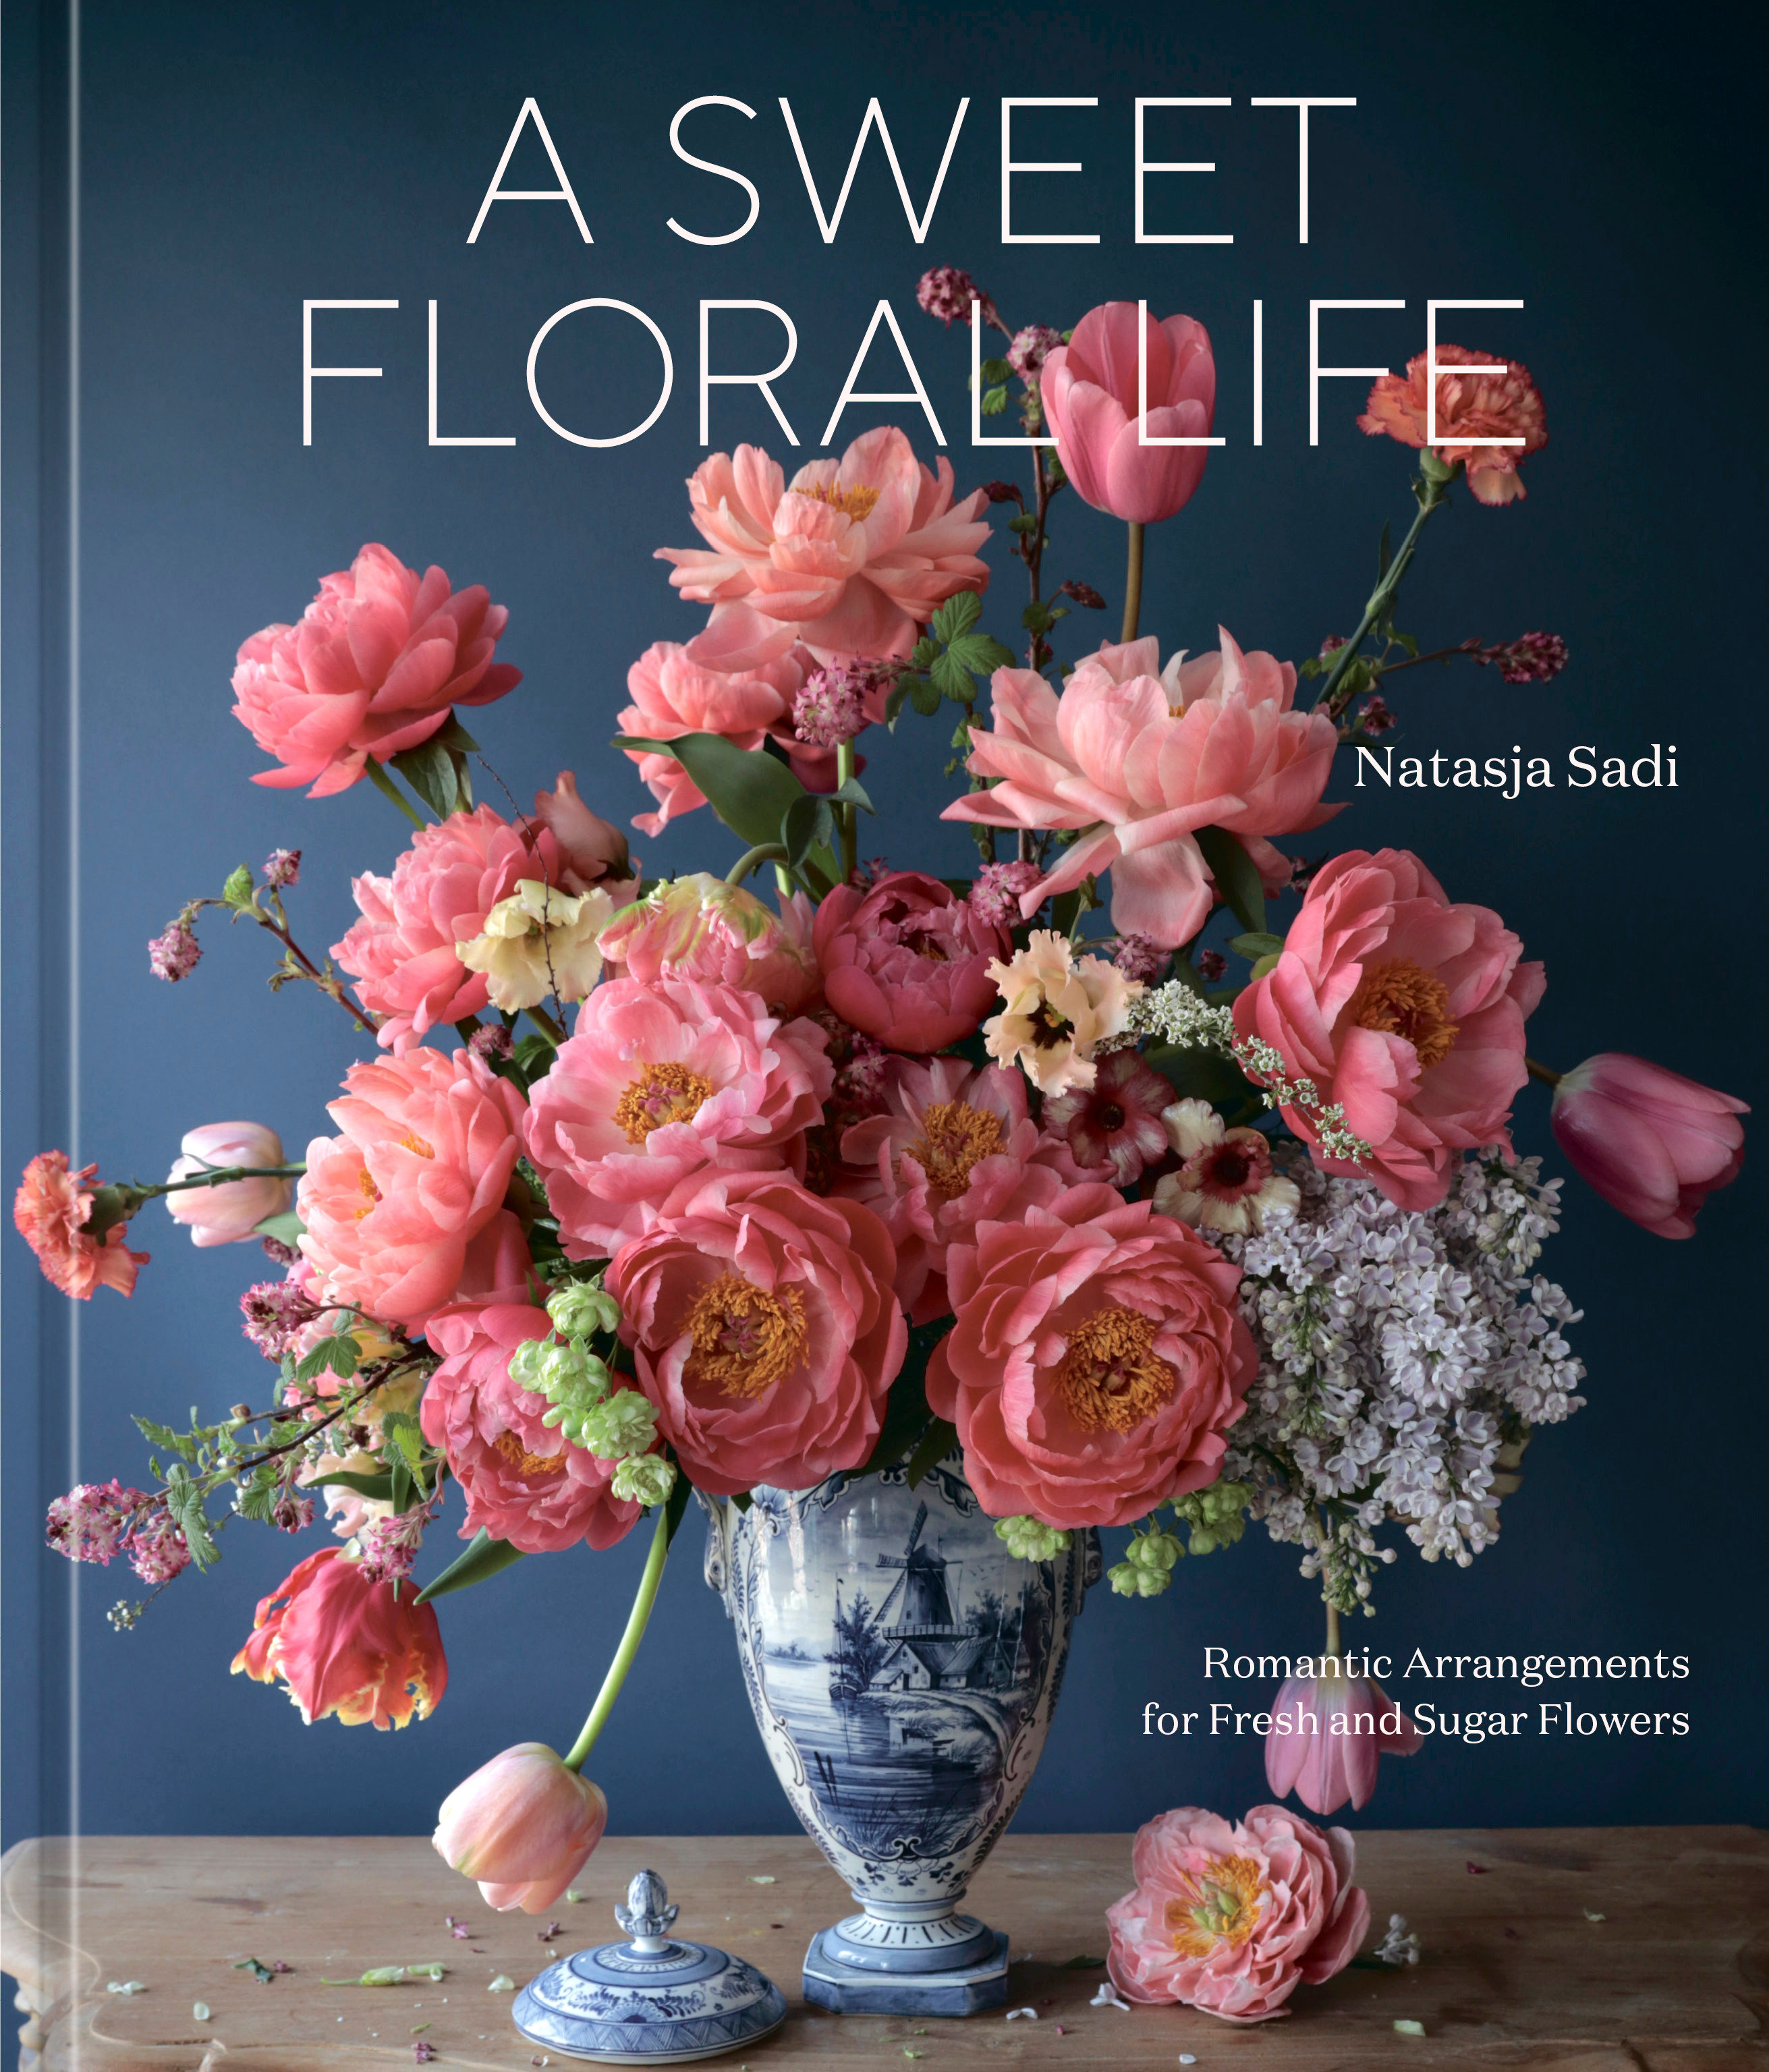 A Sweet Floral Life (Hardcover Book)